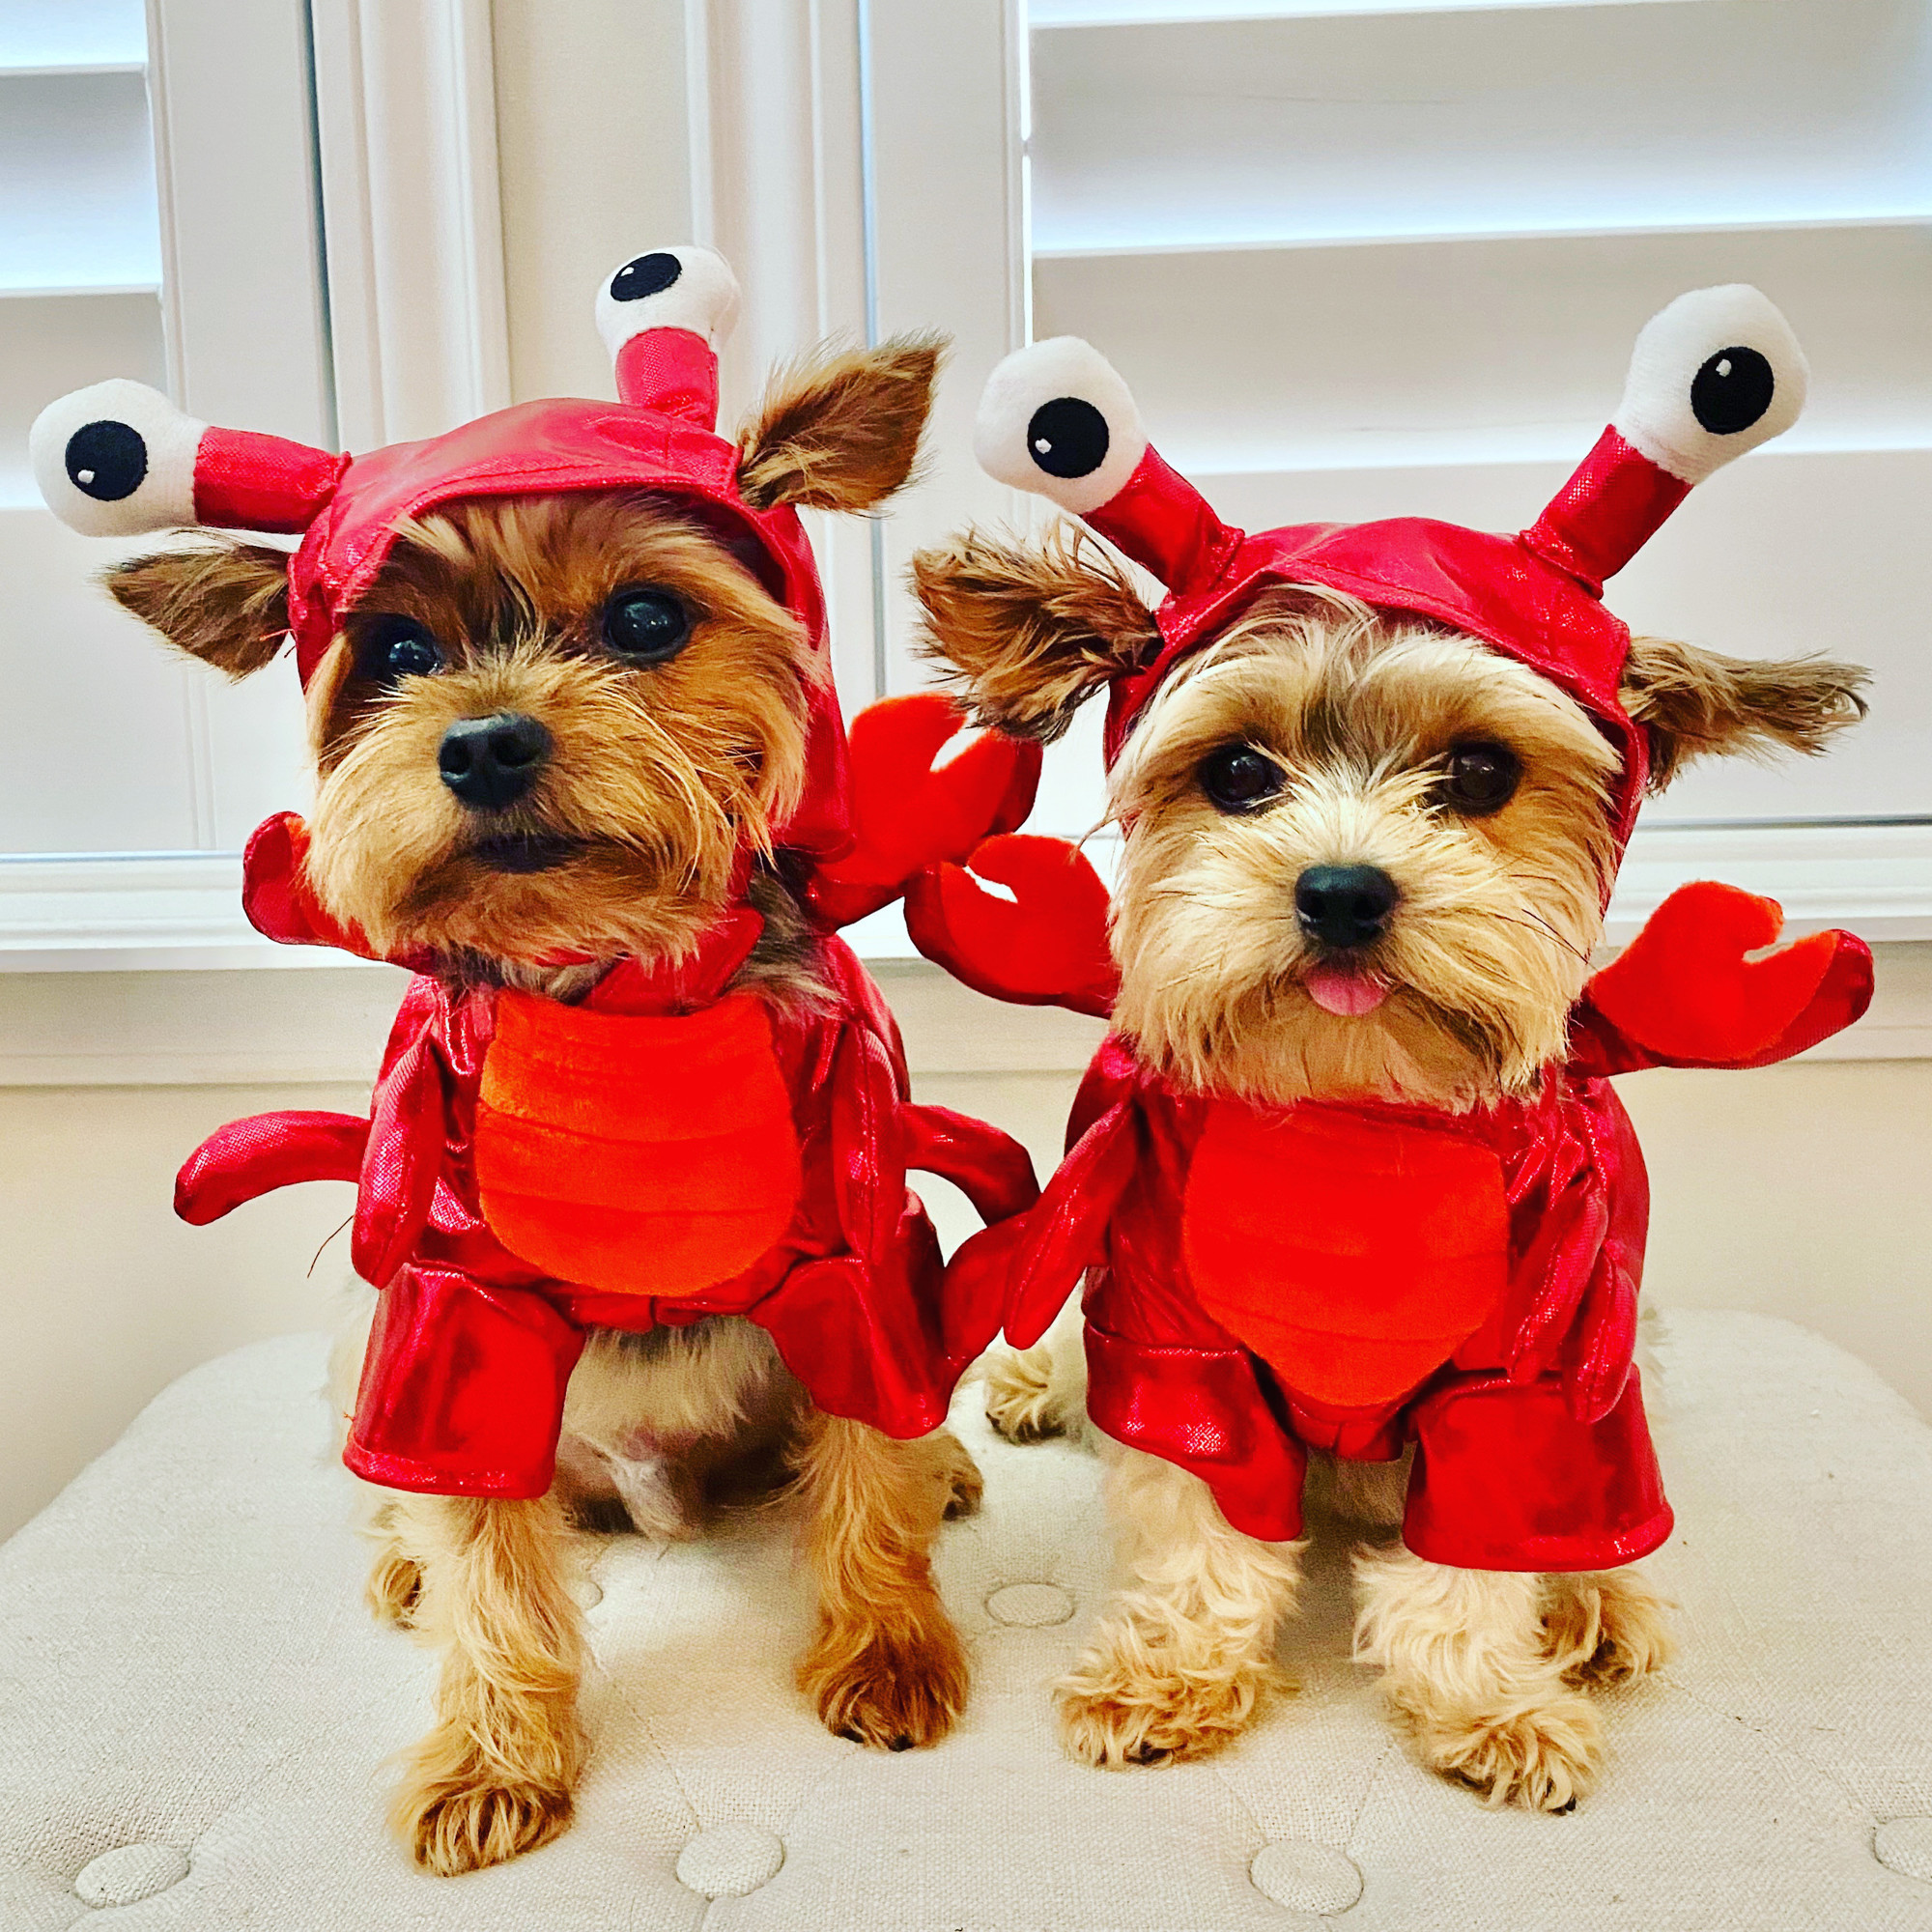 Third place went to Bailey and Lilly, the “Little Lobstahs” owned by Melissa Pennington.